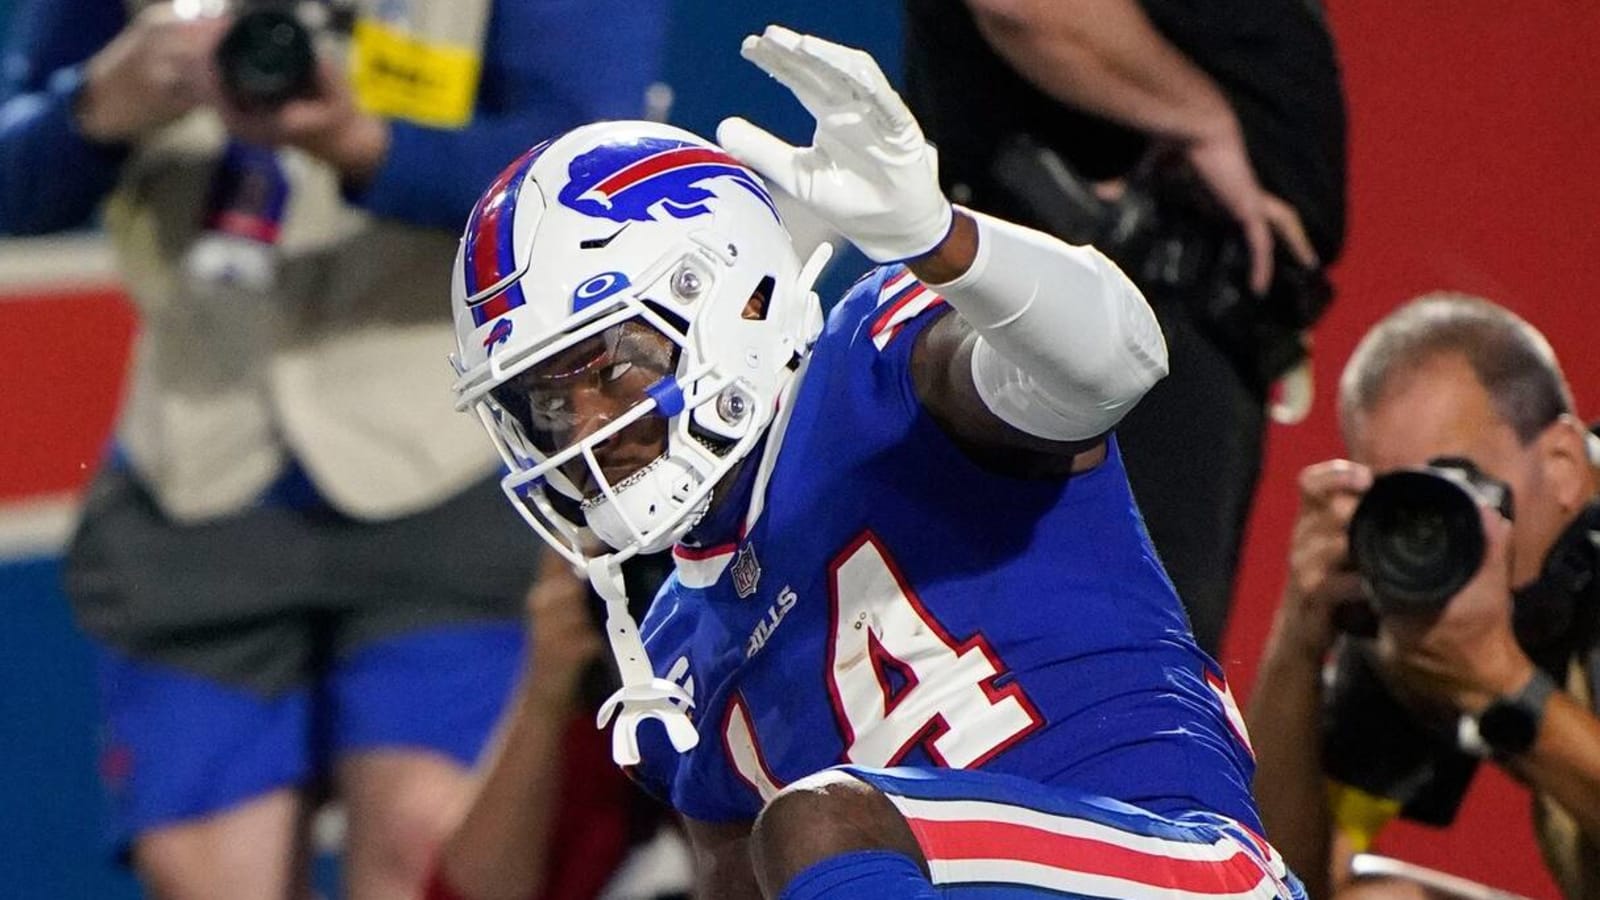 The Bills are exceeding sky-high expectations